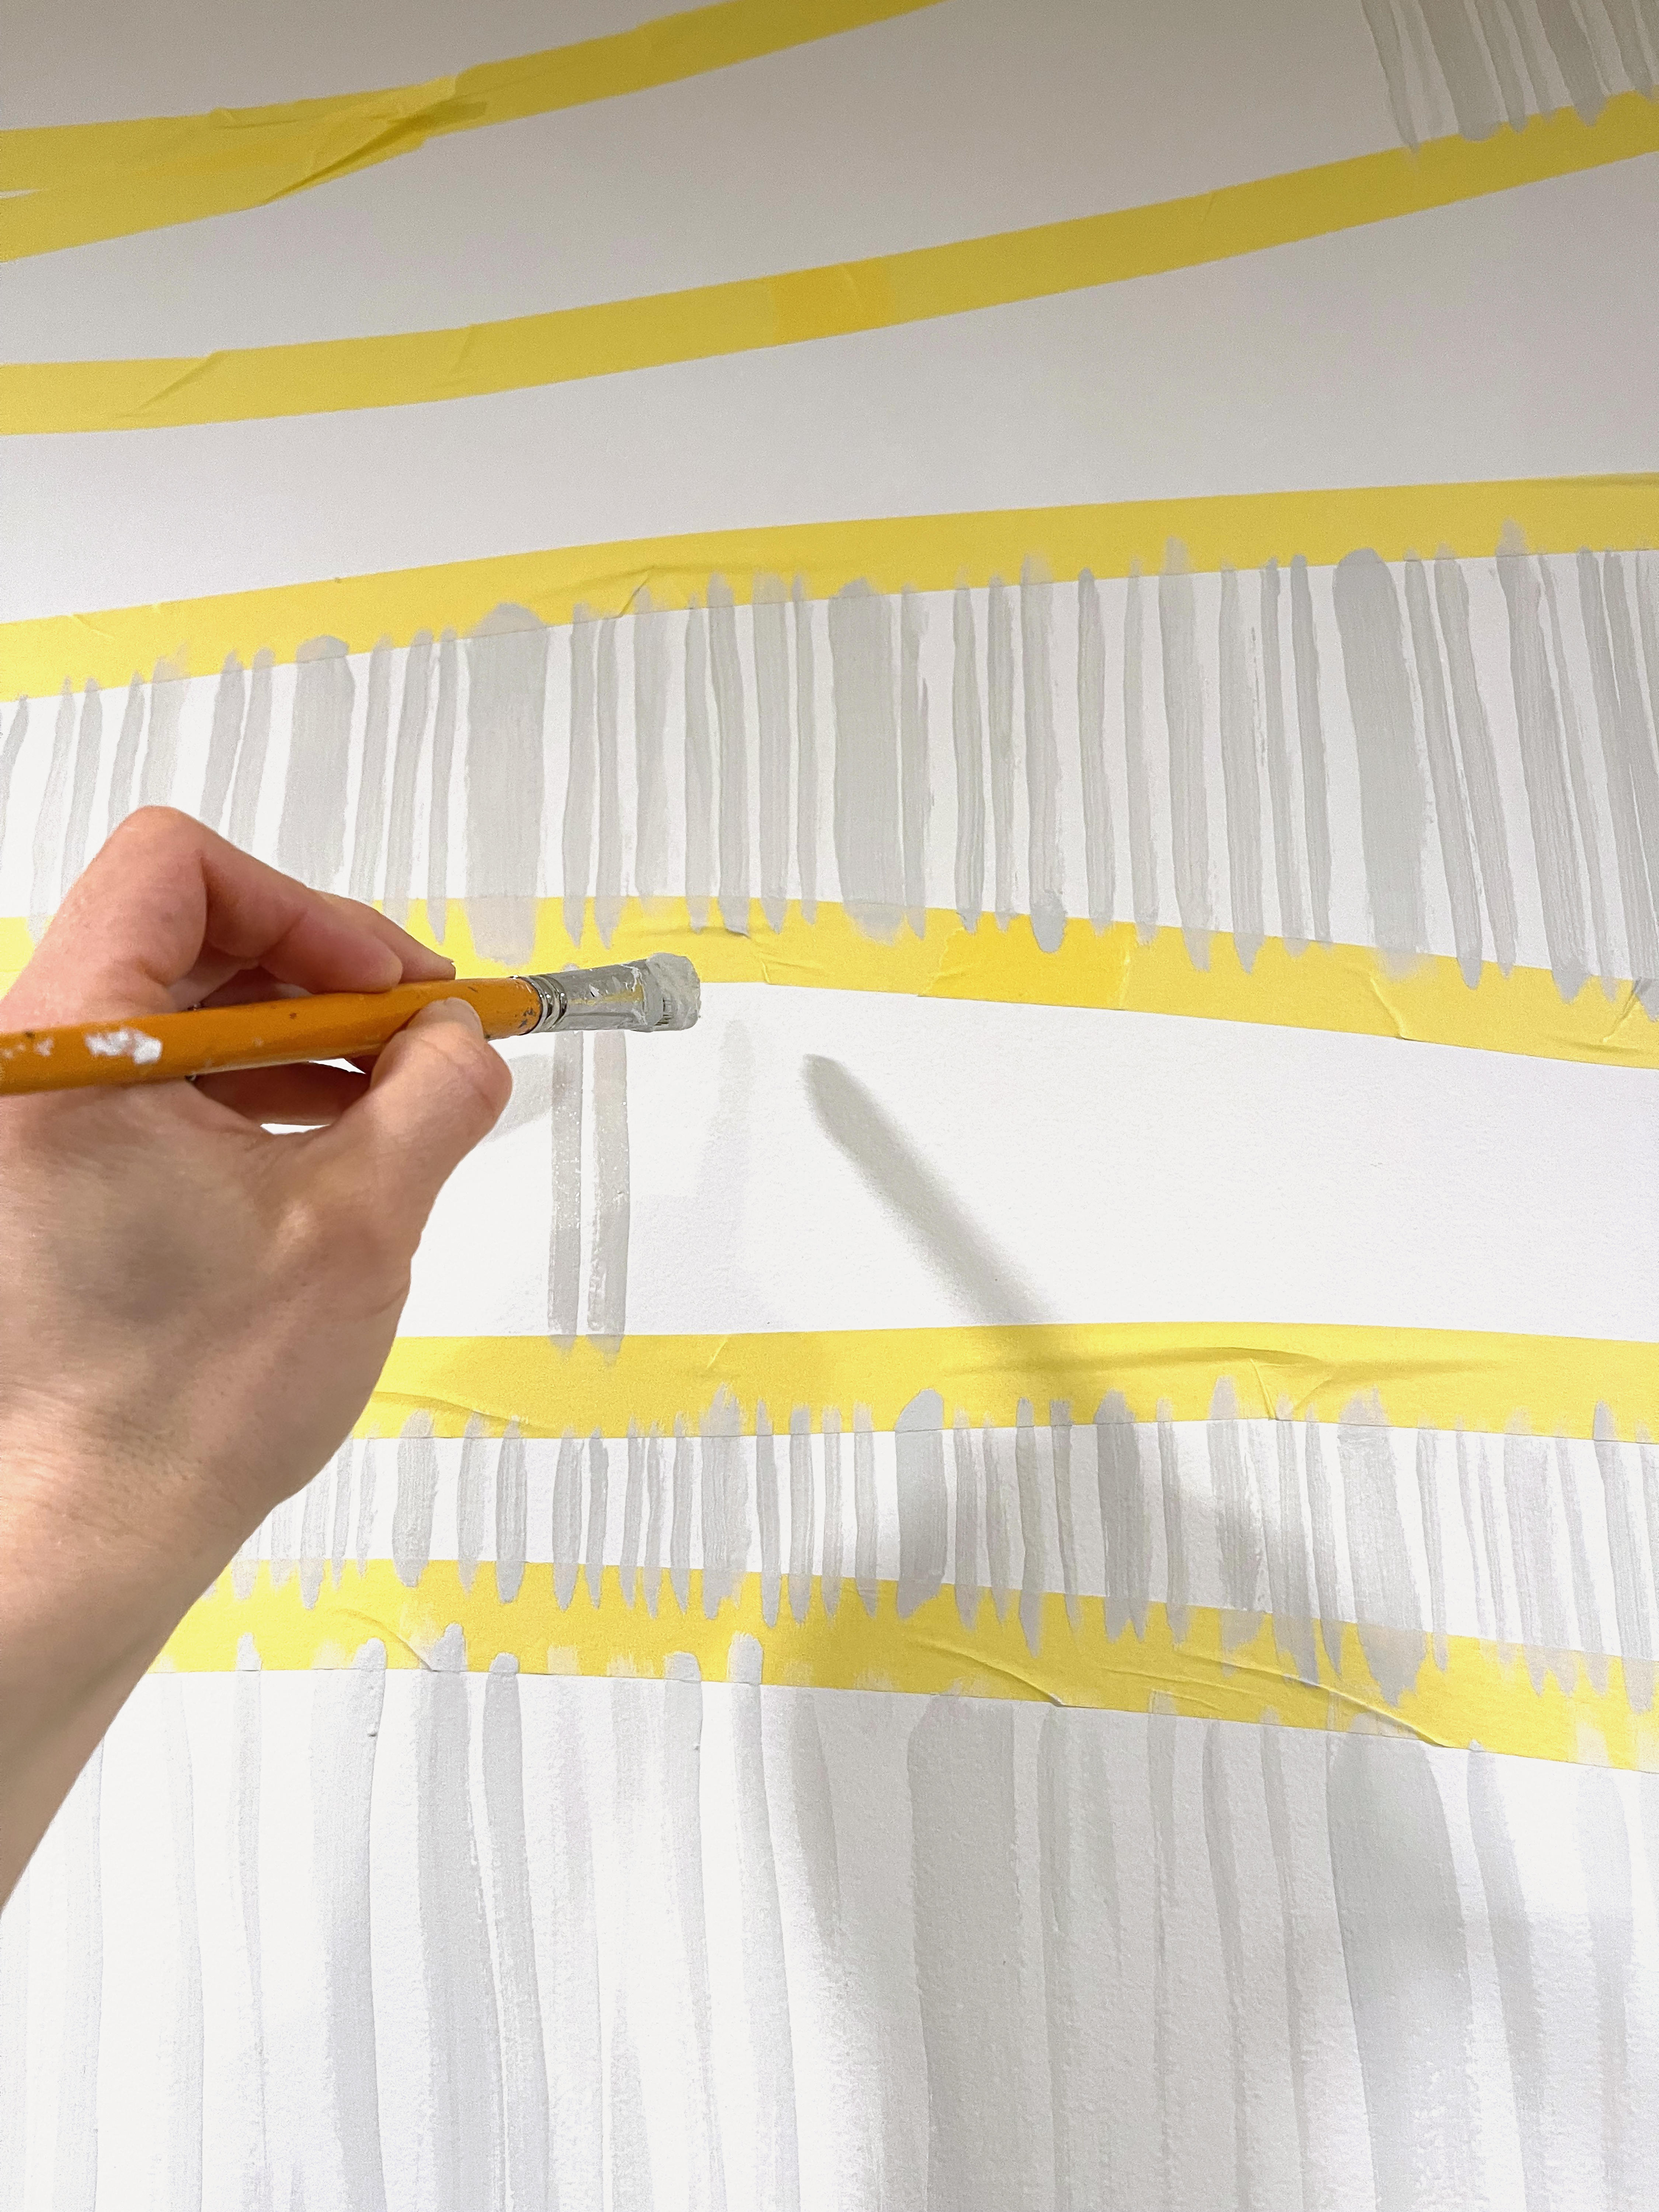 Use Frog Tape to Paint a Fun Accent Wall in Your Home